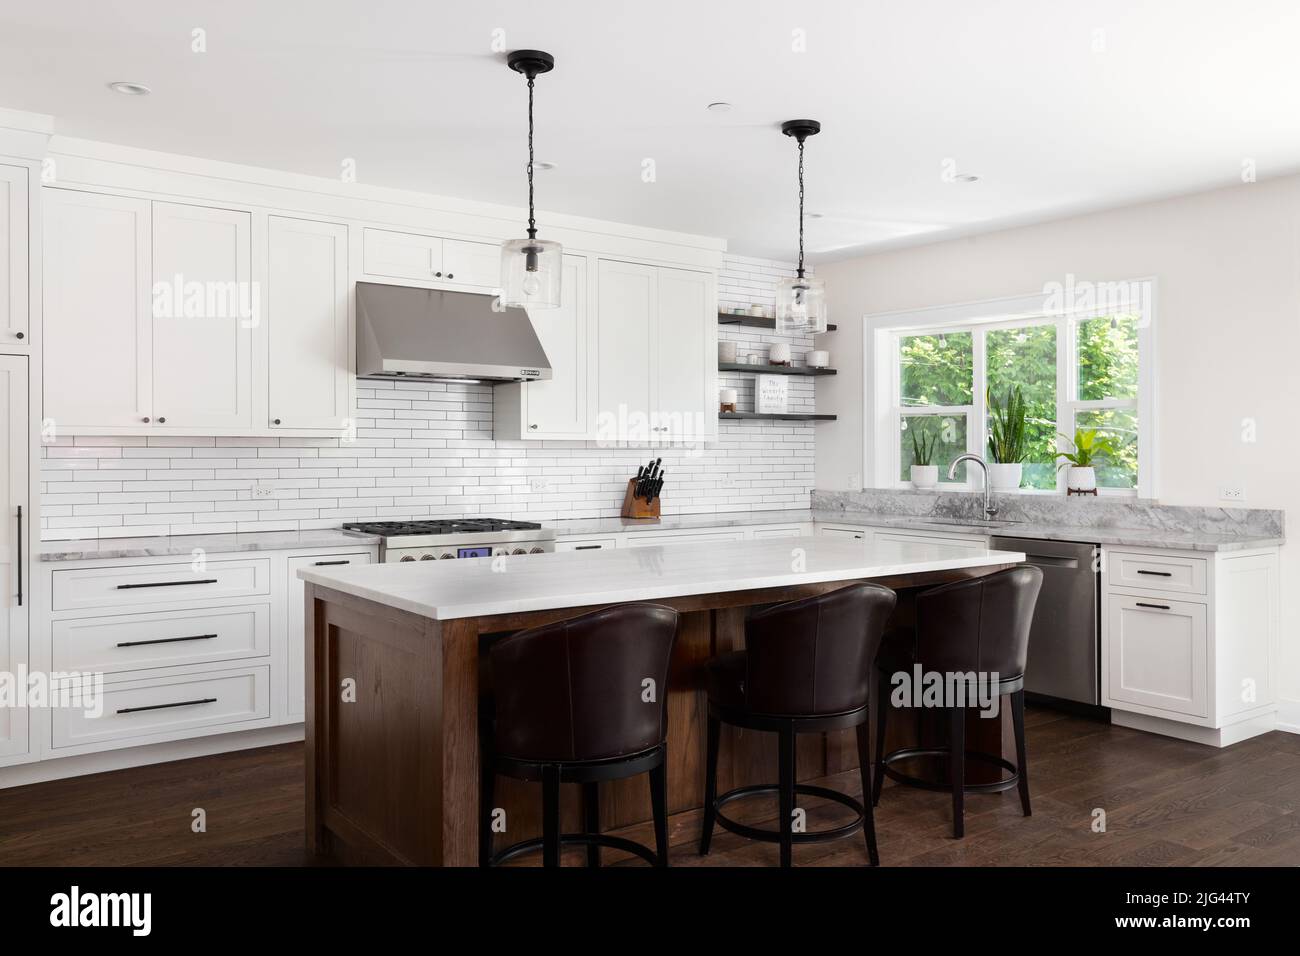 A beautiful modern farmhouse kitchen with white cabinets, a subway tile backsplash, chairs sitting at a large wood island, and marble countertops. Stock Photo